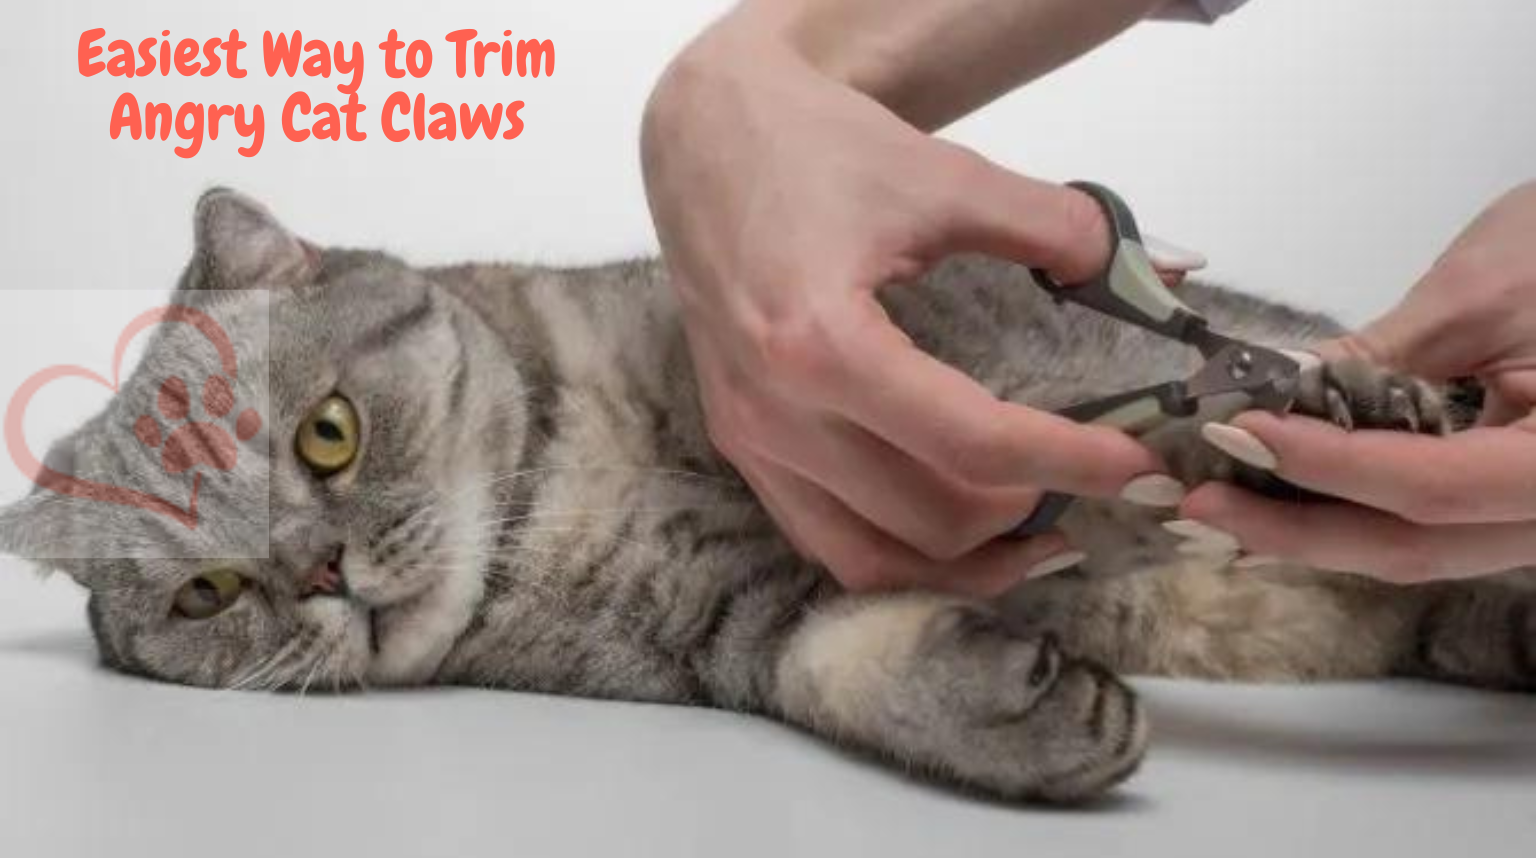 How to Trim Angry Cat Claws Safely – Step-by-Step Guide of Groomburg’s Team